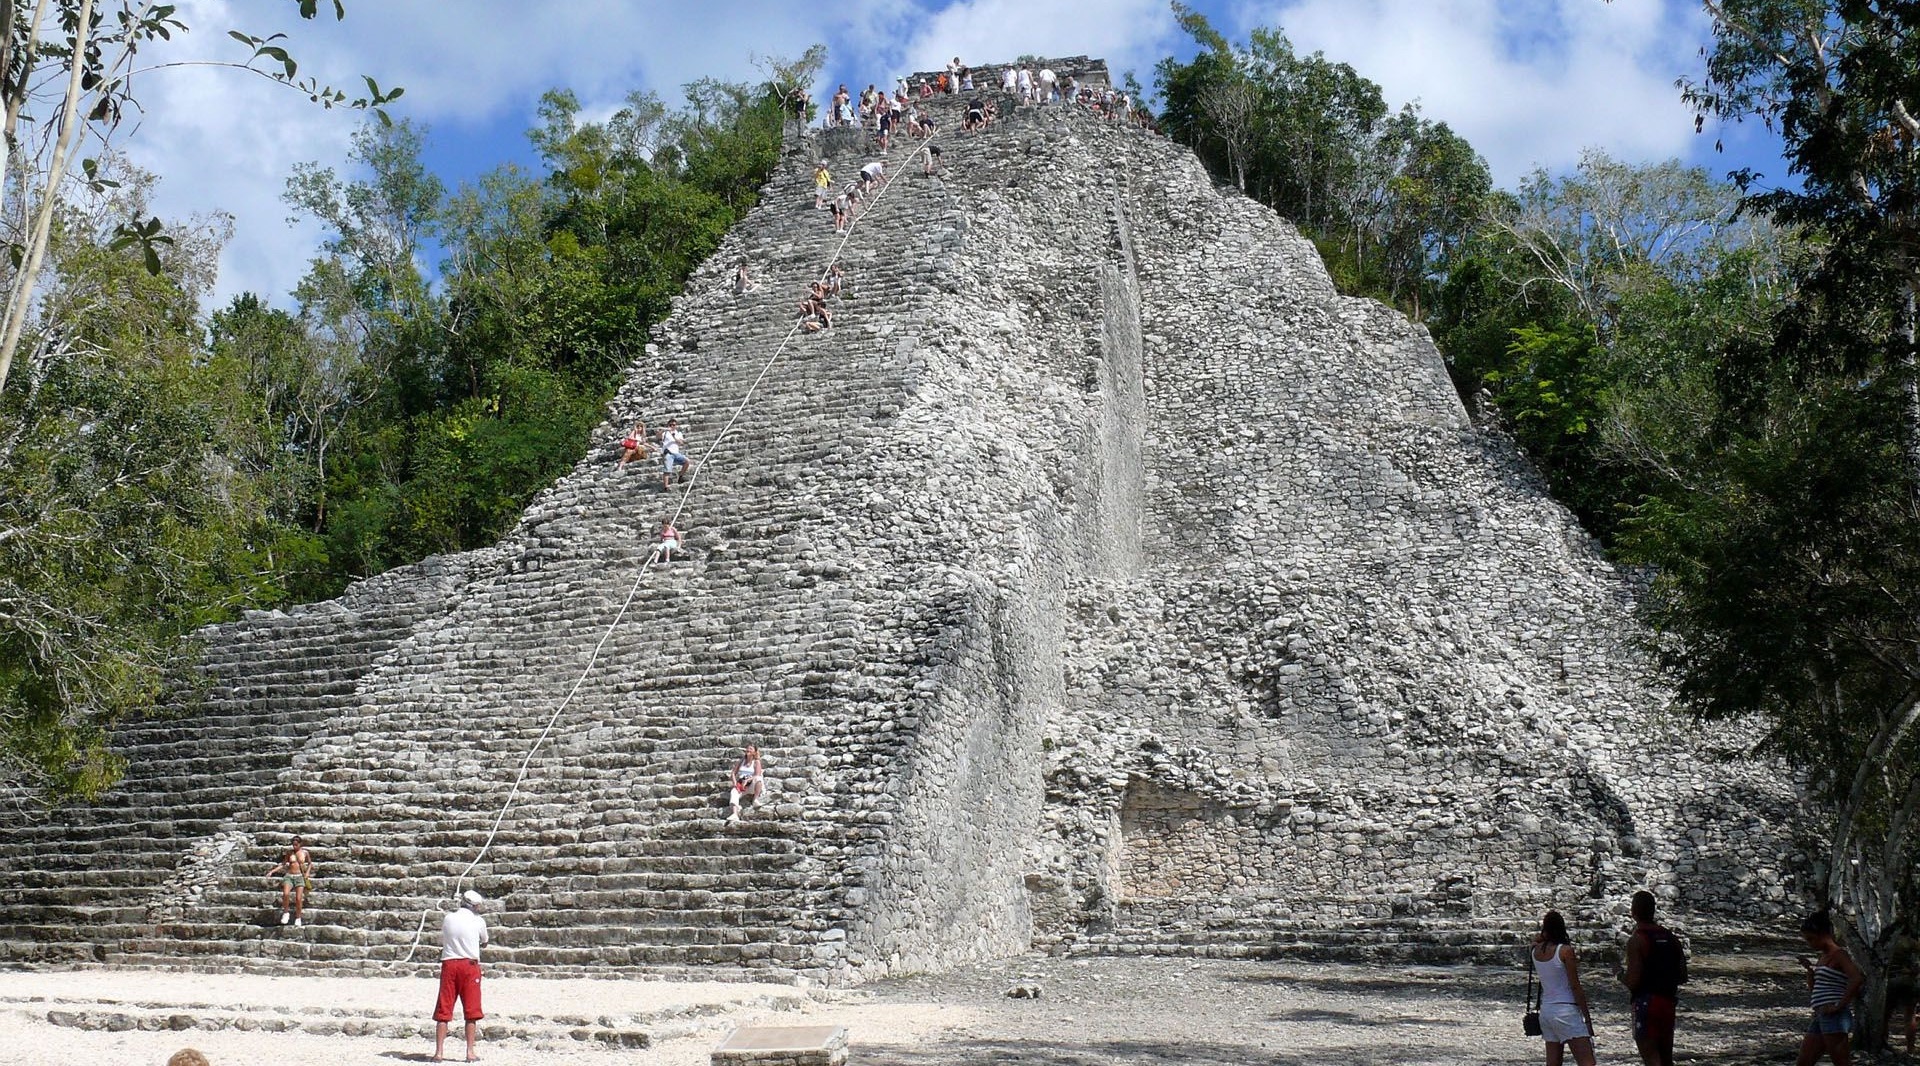 Guided Tour to Coba, Tulum, and a Mayan Village in Cancun